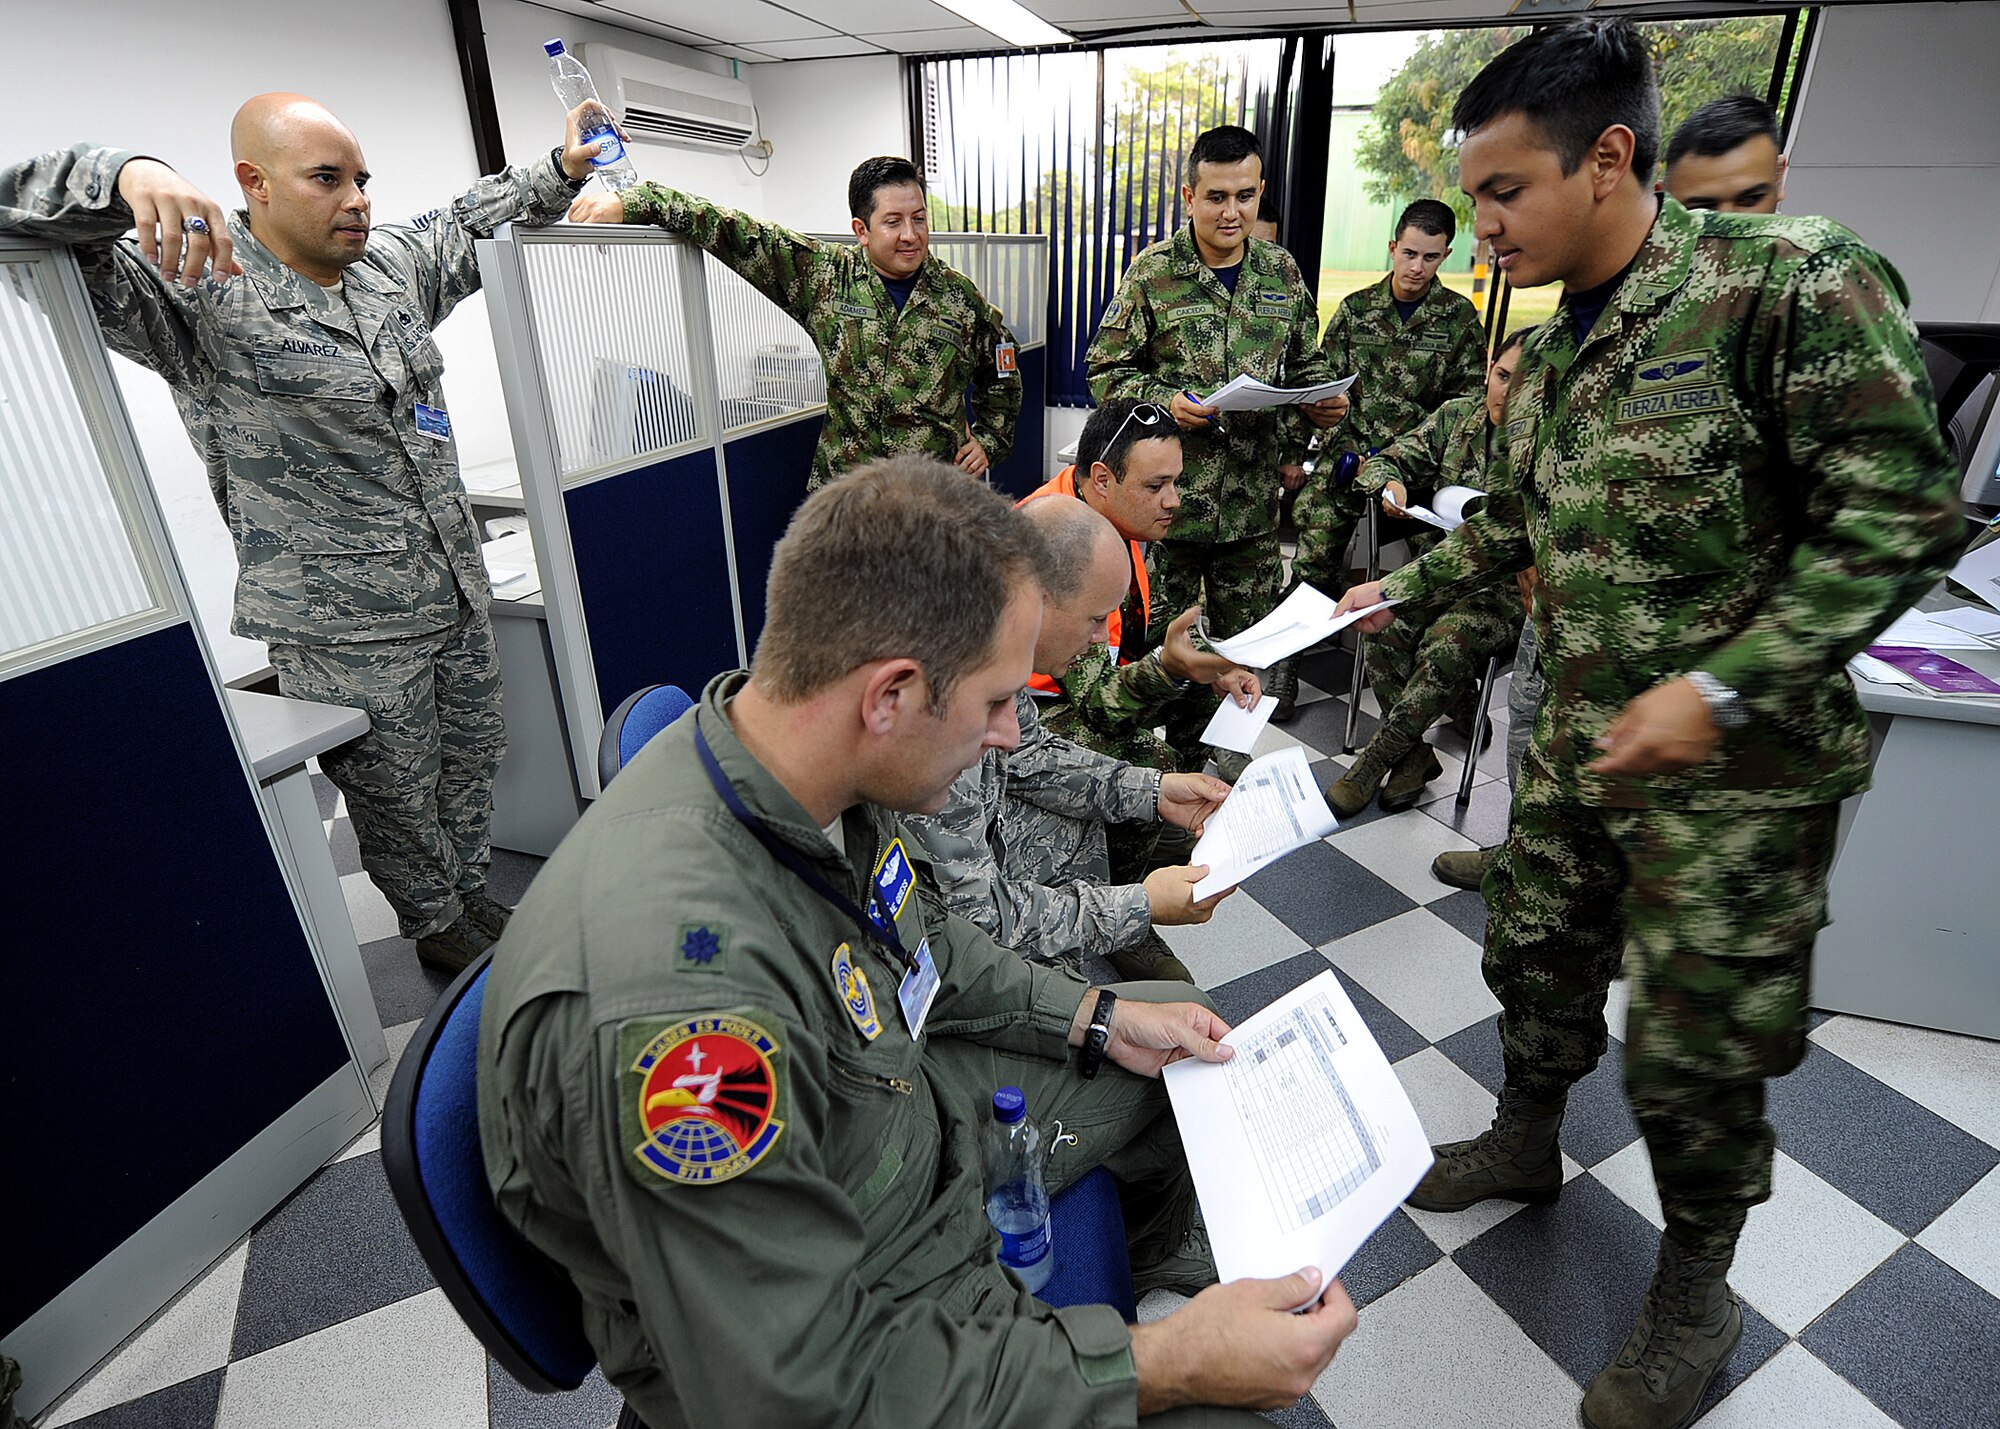 A Colombian air force member hands out the flight plan for the evening operations during the maintenance operations center briefing for senior leadership June 14, at Comando Aéreo de Combate No. 1 base, Palanquero, Colombia, as part of a month-long Air Mobility Command Building Partner Capacity mission. (U.S. Air Force photo by Tech. Sgt. Lesley Waters)